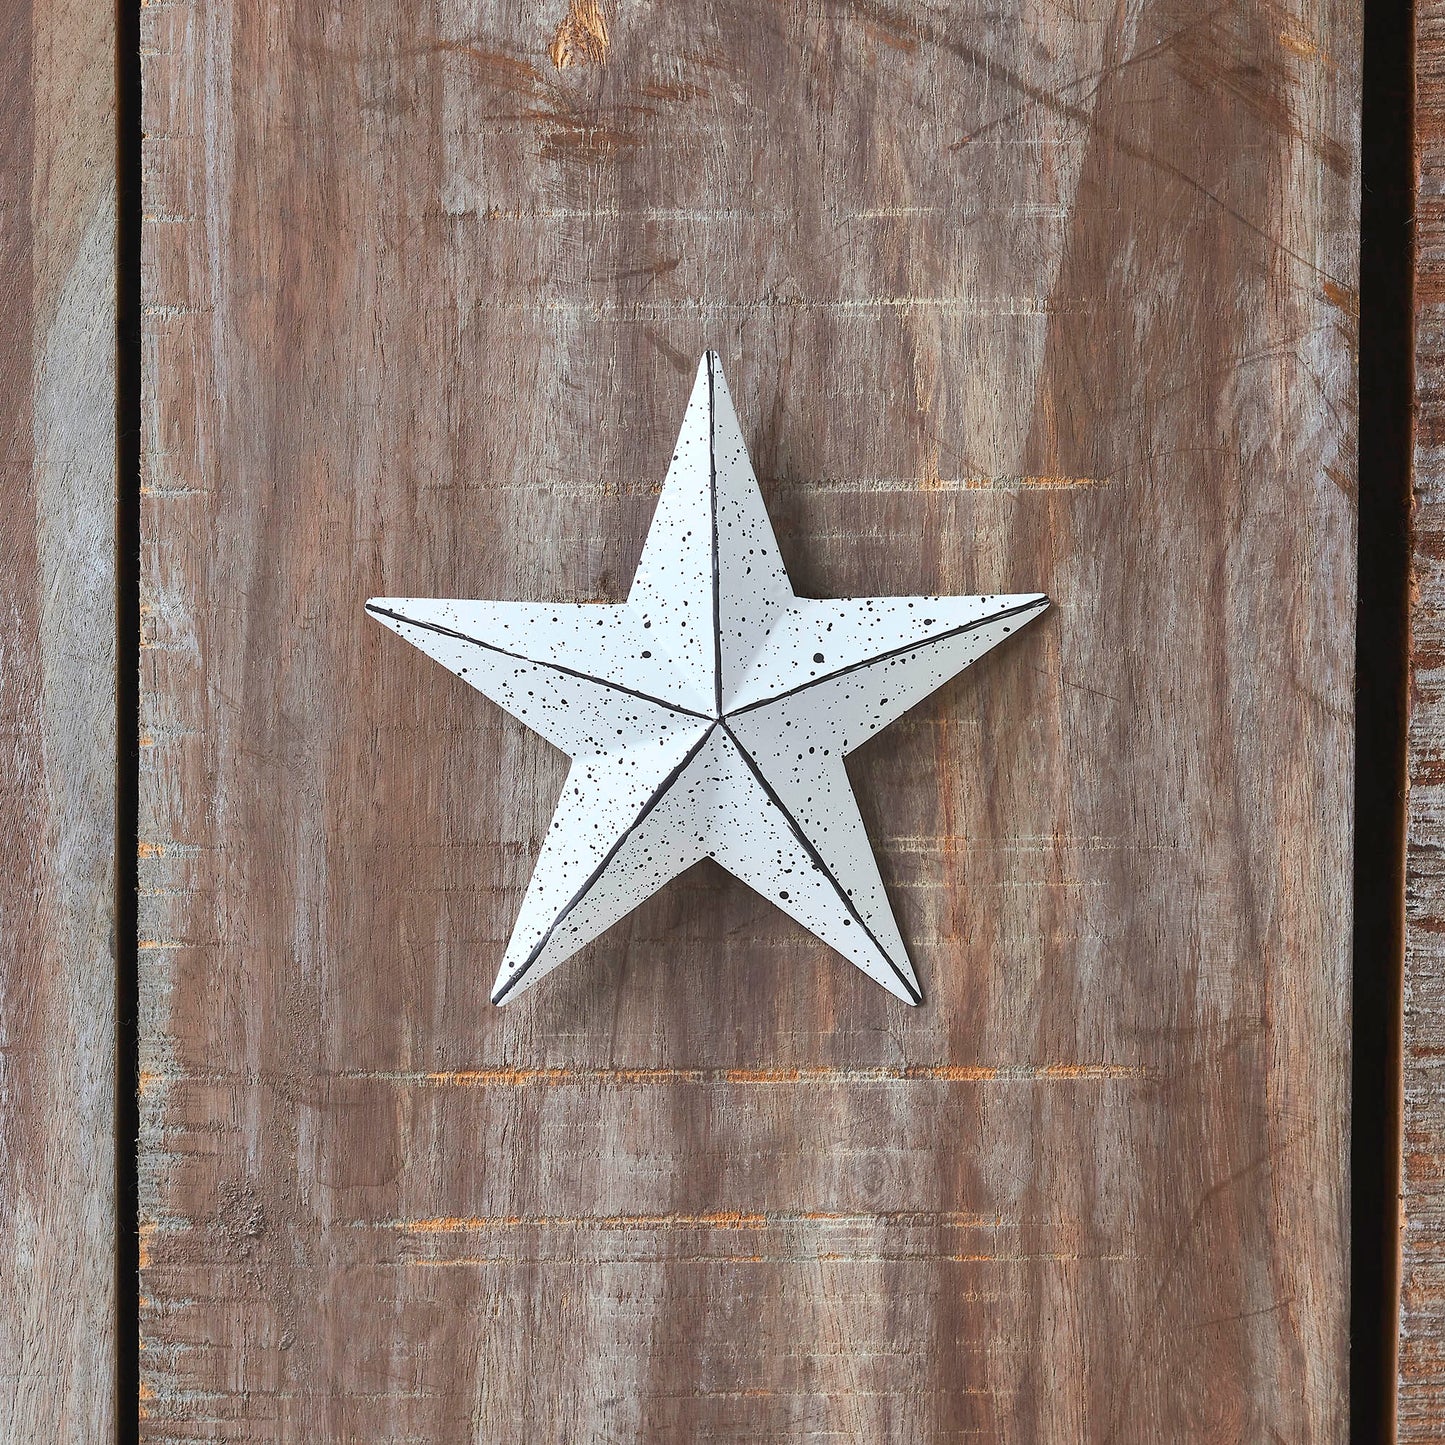 VHC Brands Patriotic Faceted Metal Star White Wall Hanging 4x4, Independence Day Decor, American Star Design, Distressed Appearance Metal Wall Hanging,  Star Shape, Country, Matte White